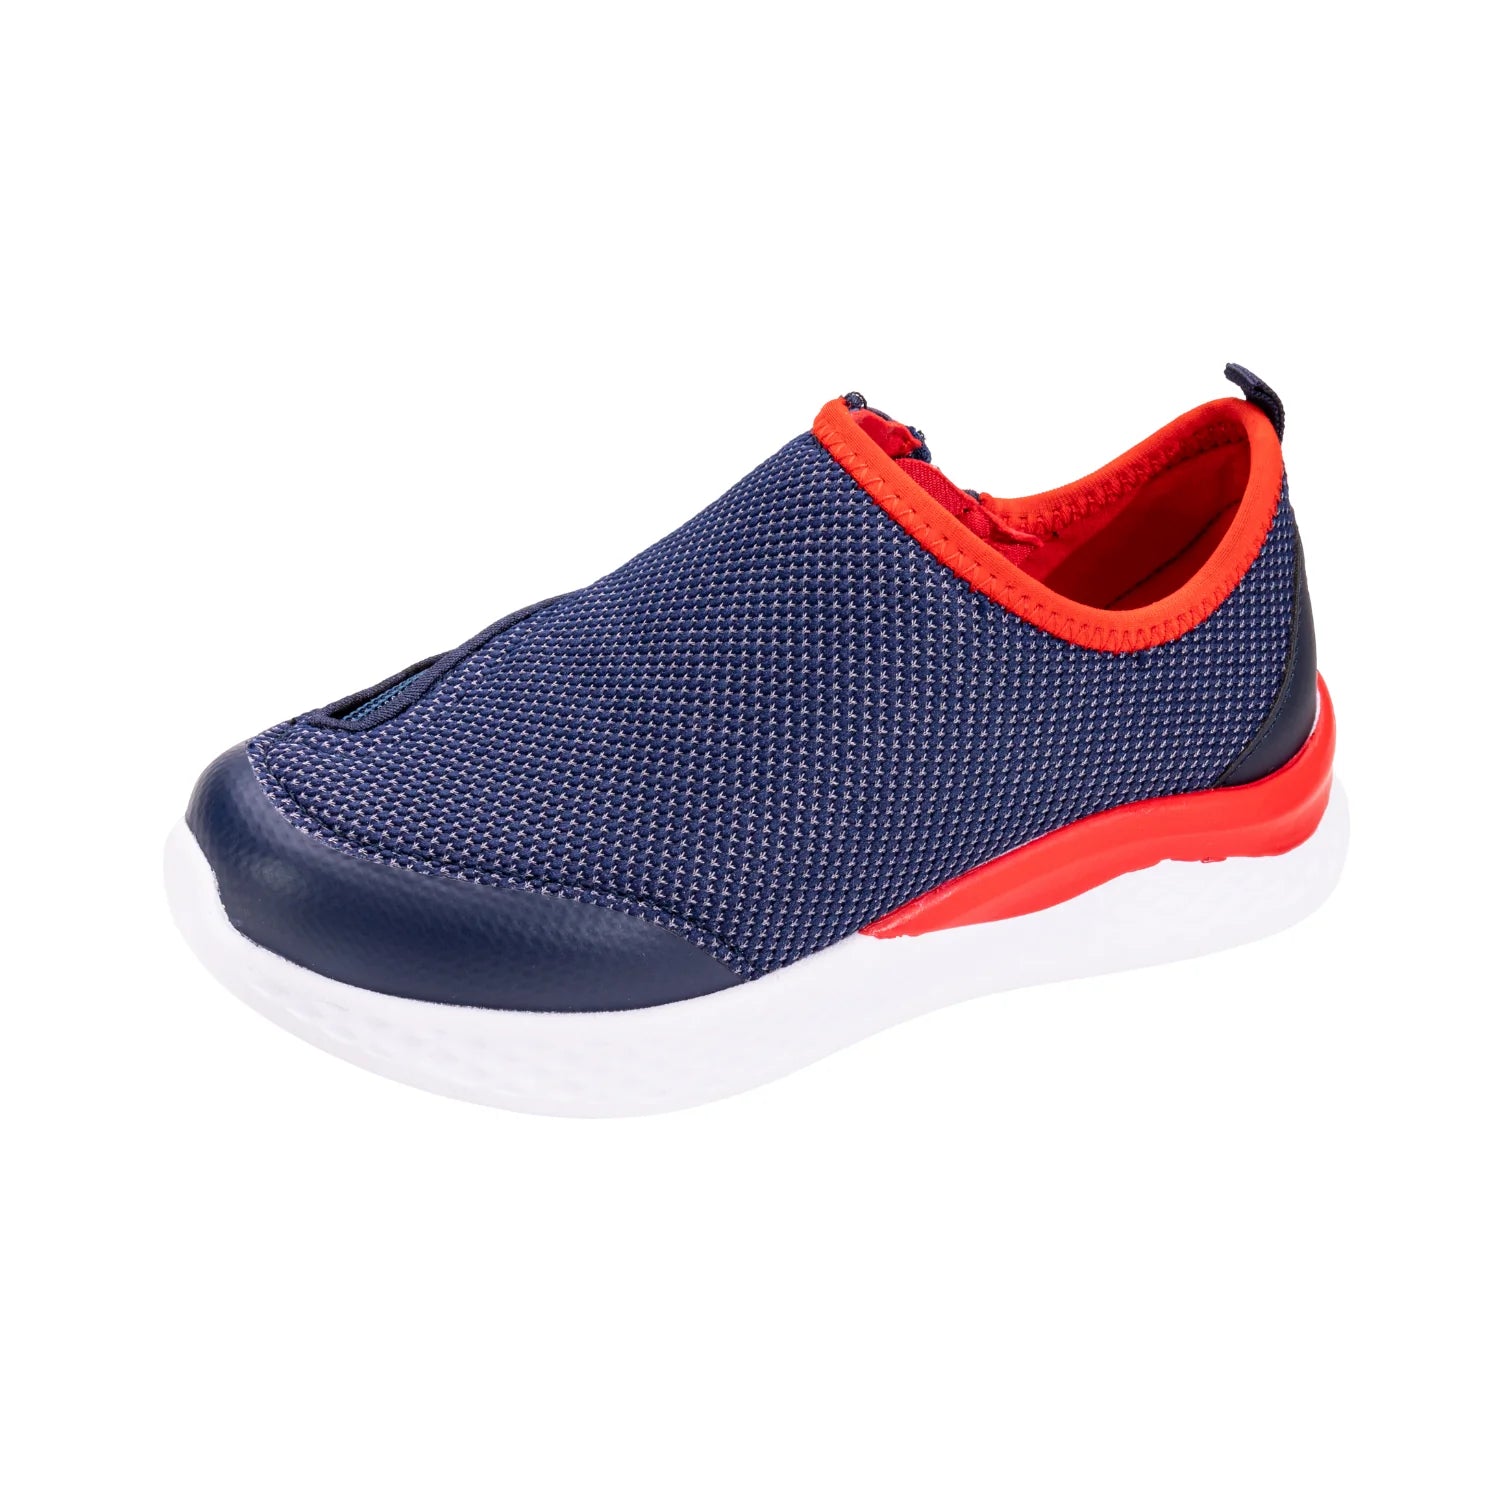 Boys navy red zippered shoes